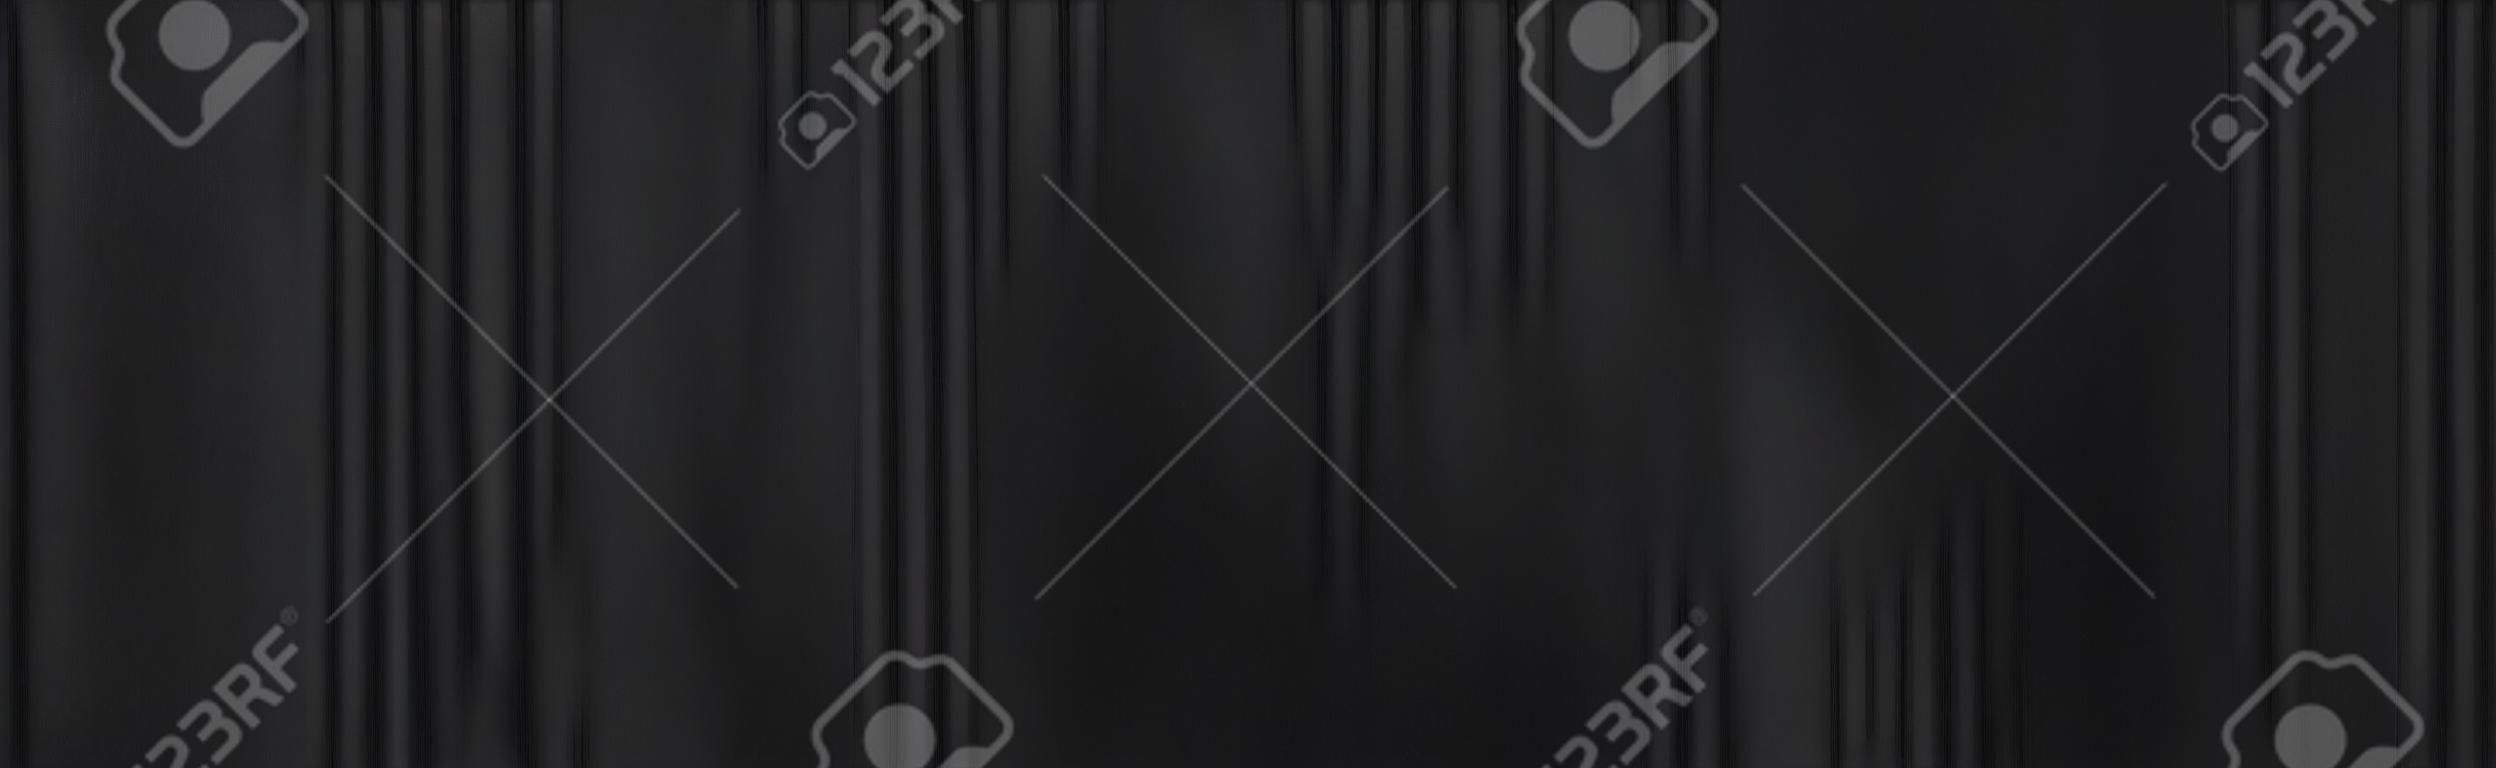 Panorama of Black patterned plastic wall panels texture and seamless background